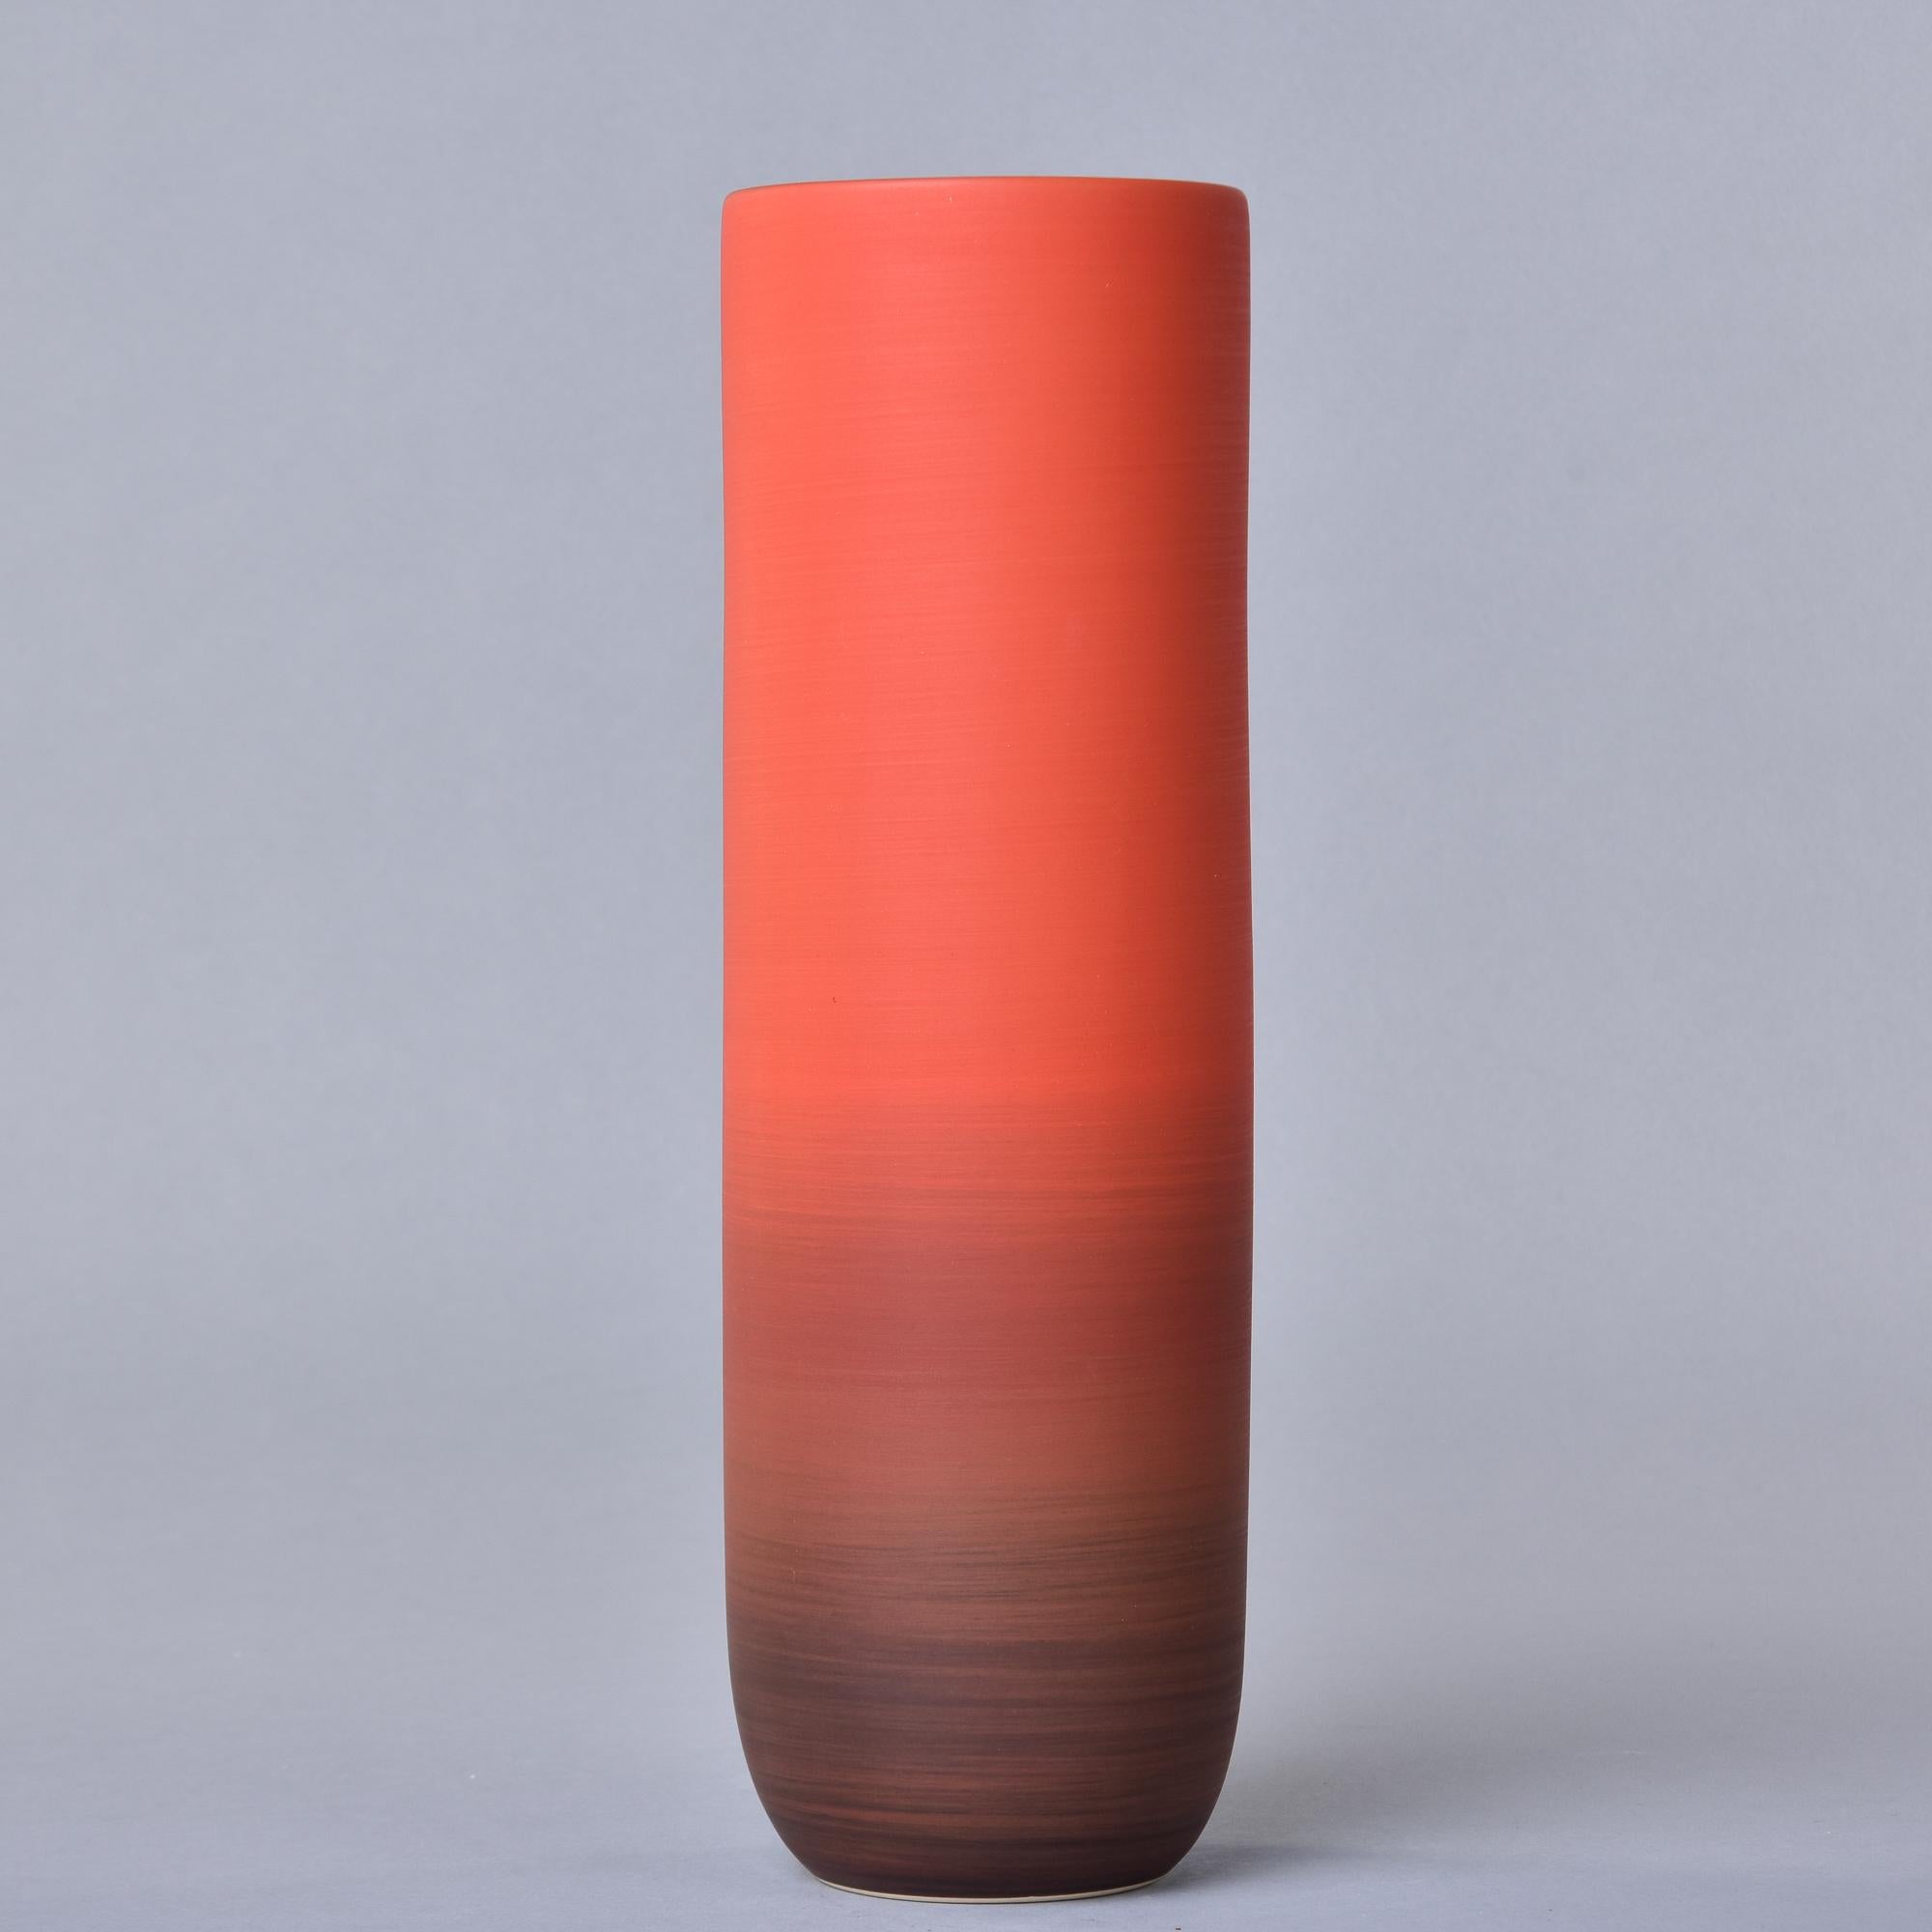 New and made in Italy by Rina Menardi, this tall Canna 2 vase has a poppy glaze. The deep orange red with has an ombre fade from bottom to top and a matte black interior glaze. Signed on underside of base by the maker. 

We have an extensive